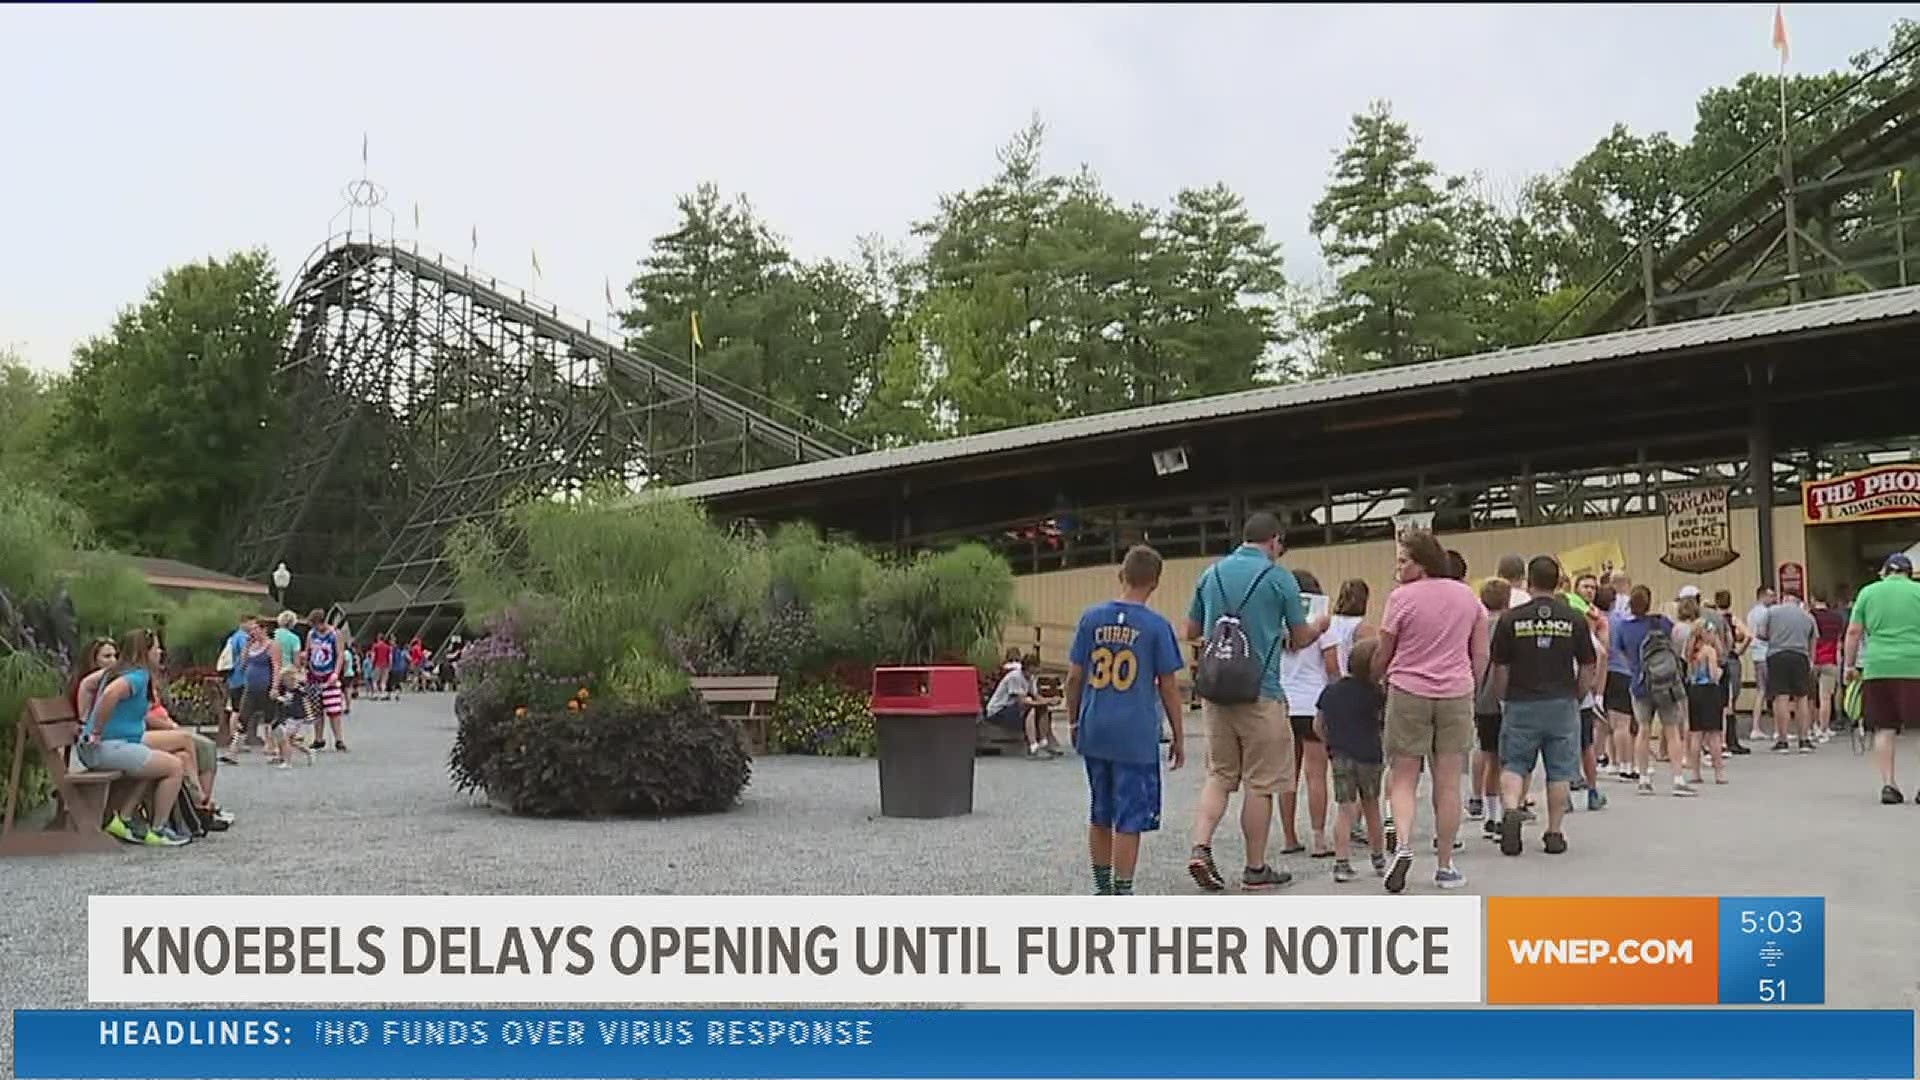 The 2020 season had already been pushed back to May, now officials have postponed the amusement resort's opening indefinitely.